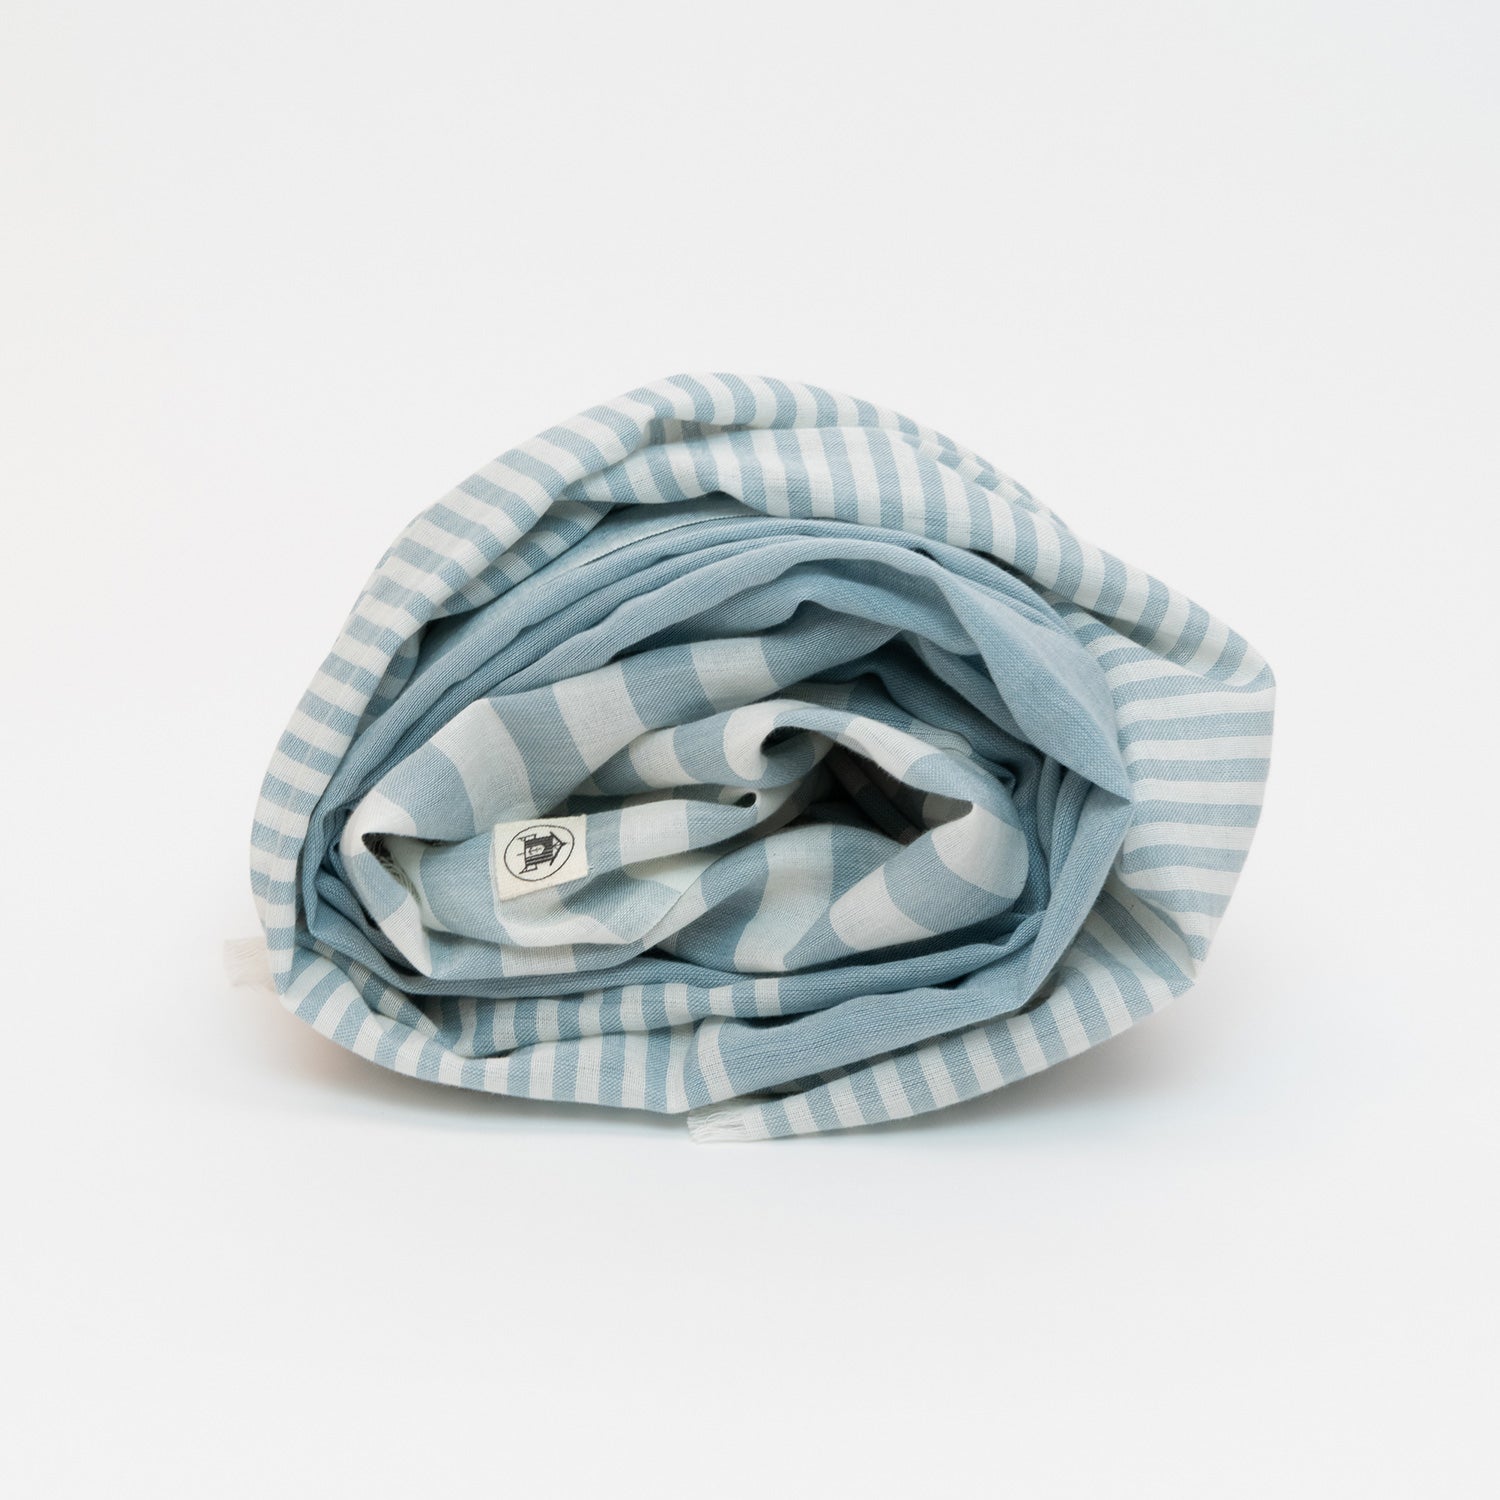 A photo of the sea blue scarf rolled up on a white background.